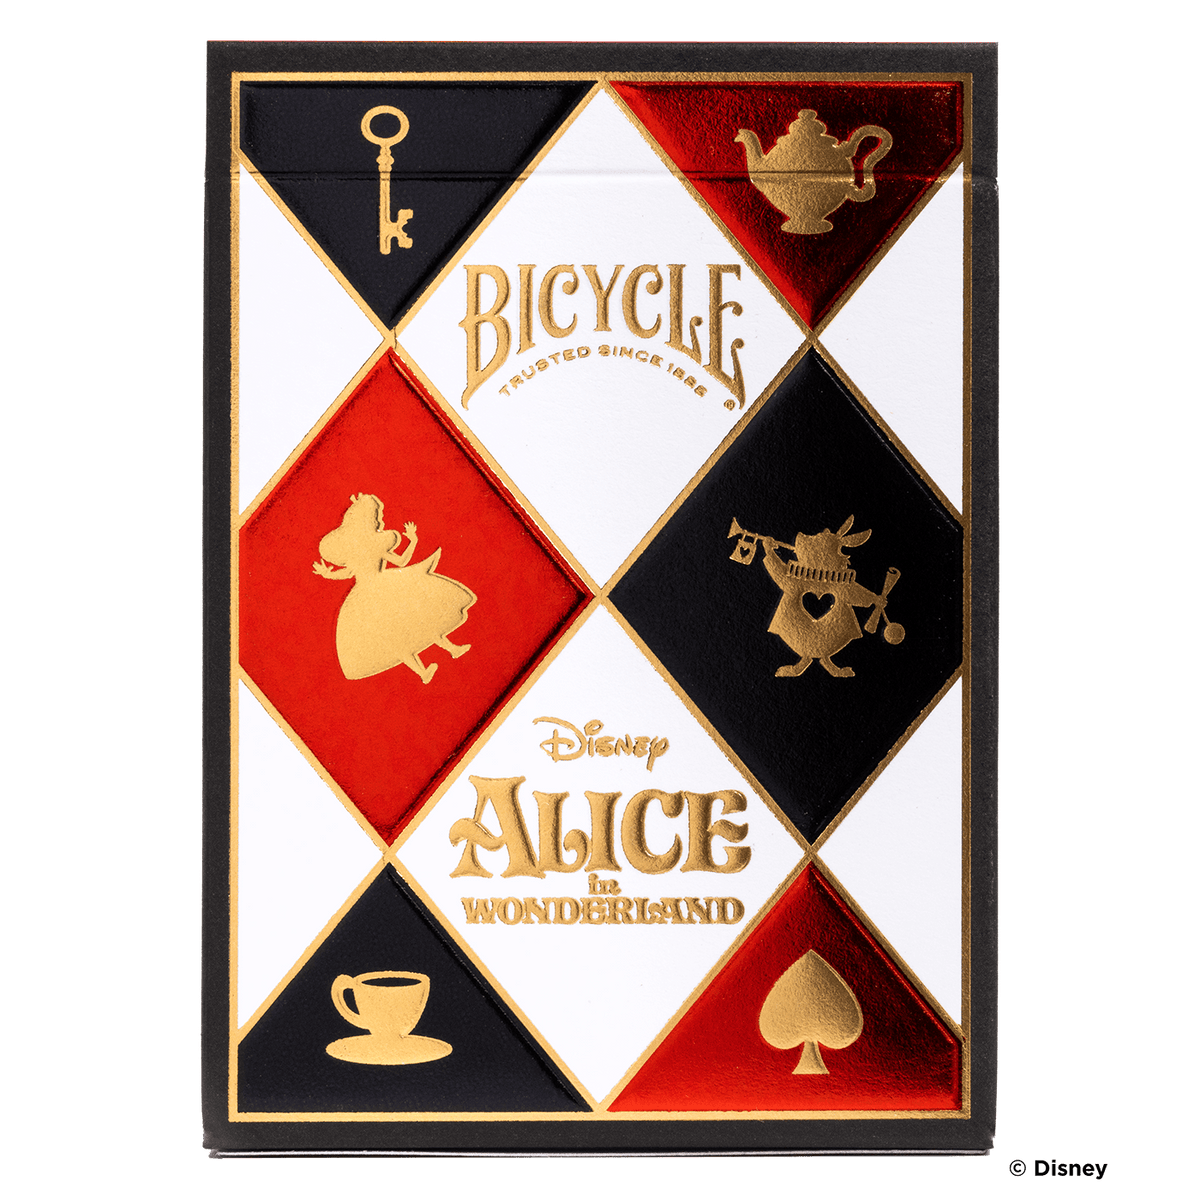 Bicycle Disney Alice in Wonderland Playing Cards-United States Playing Cards Company-Ace Cards &amp; Collectibles